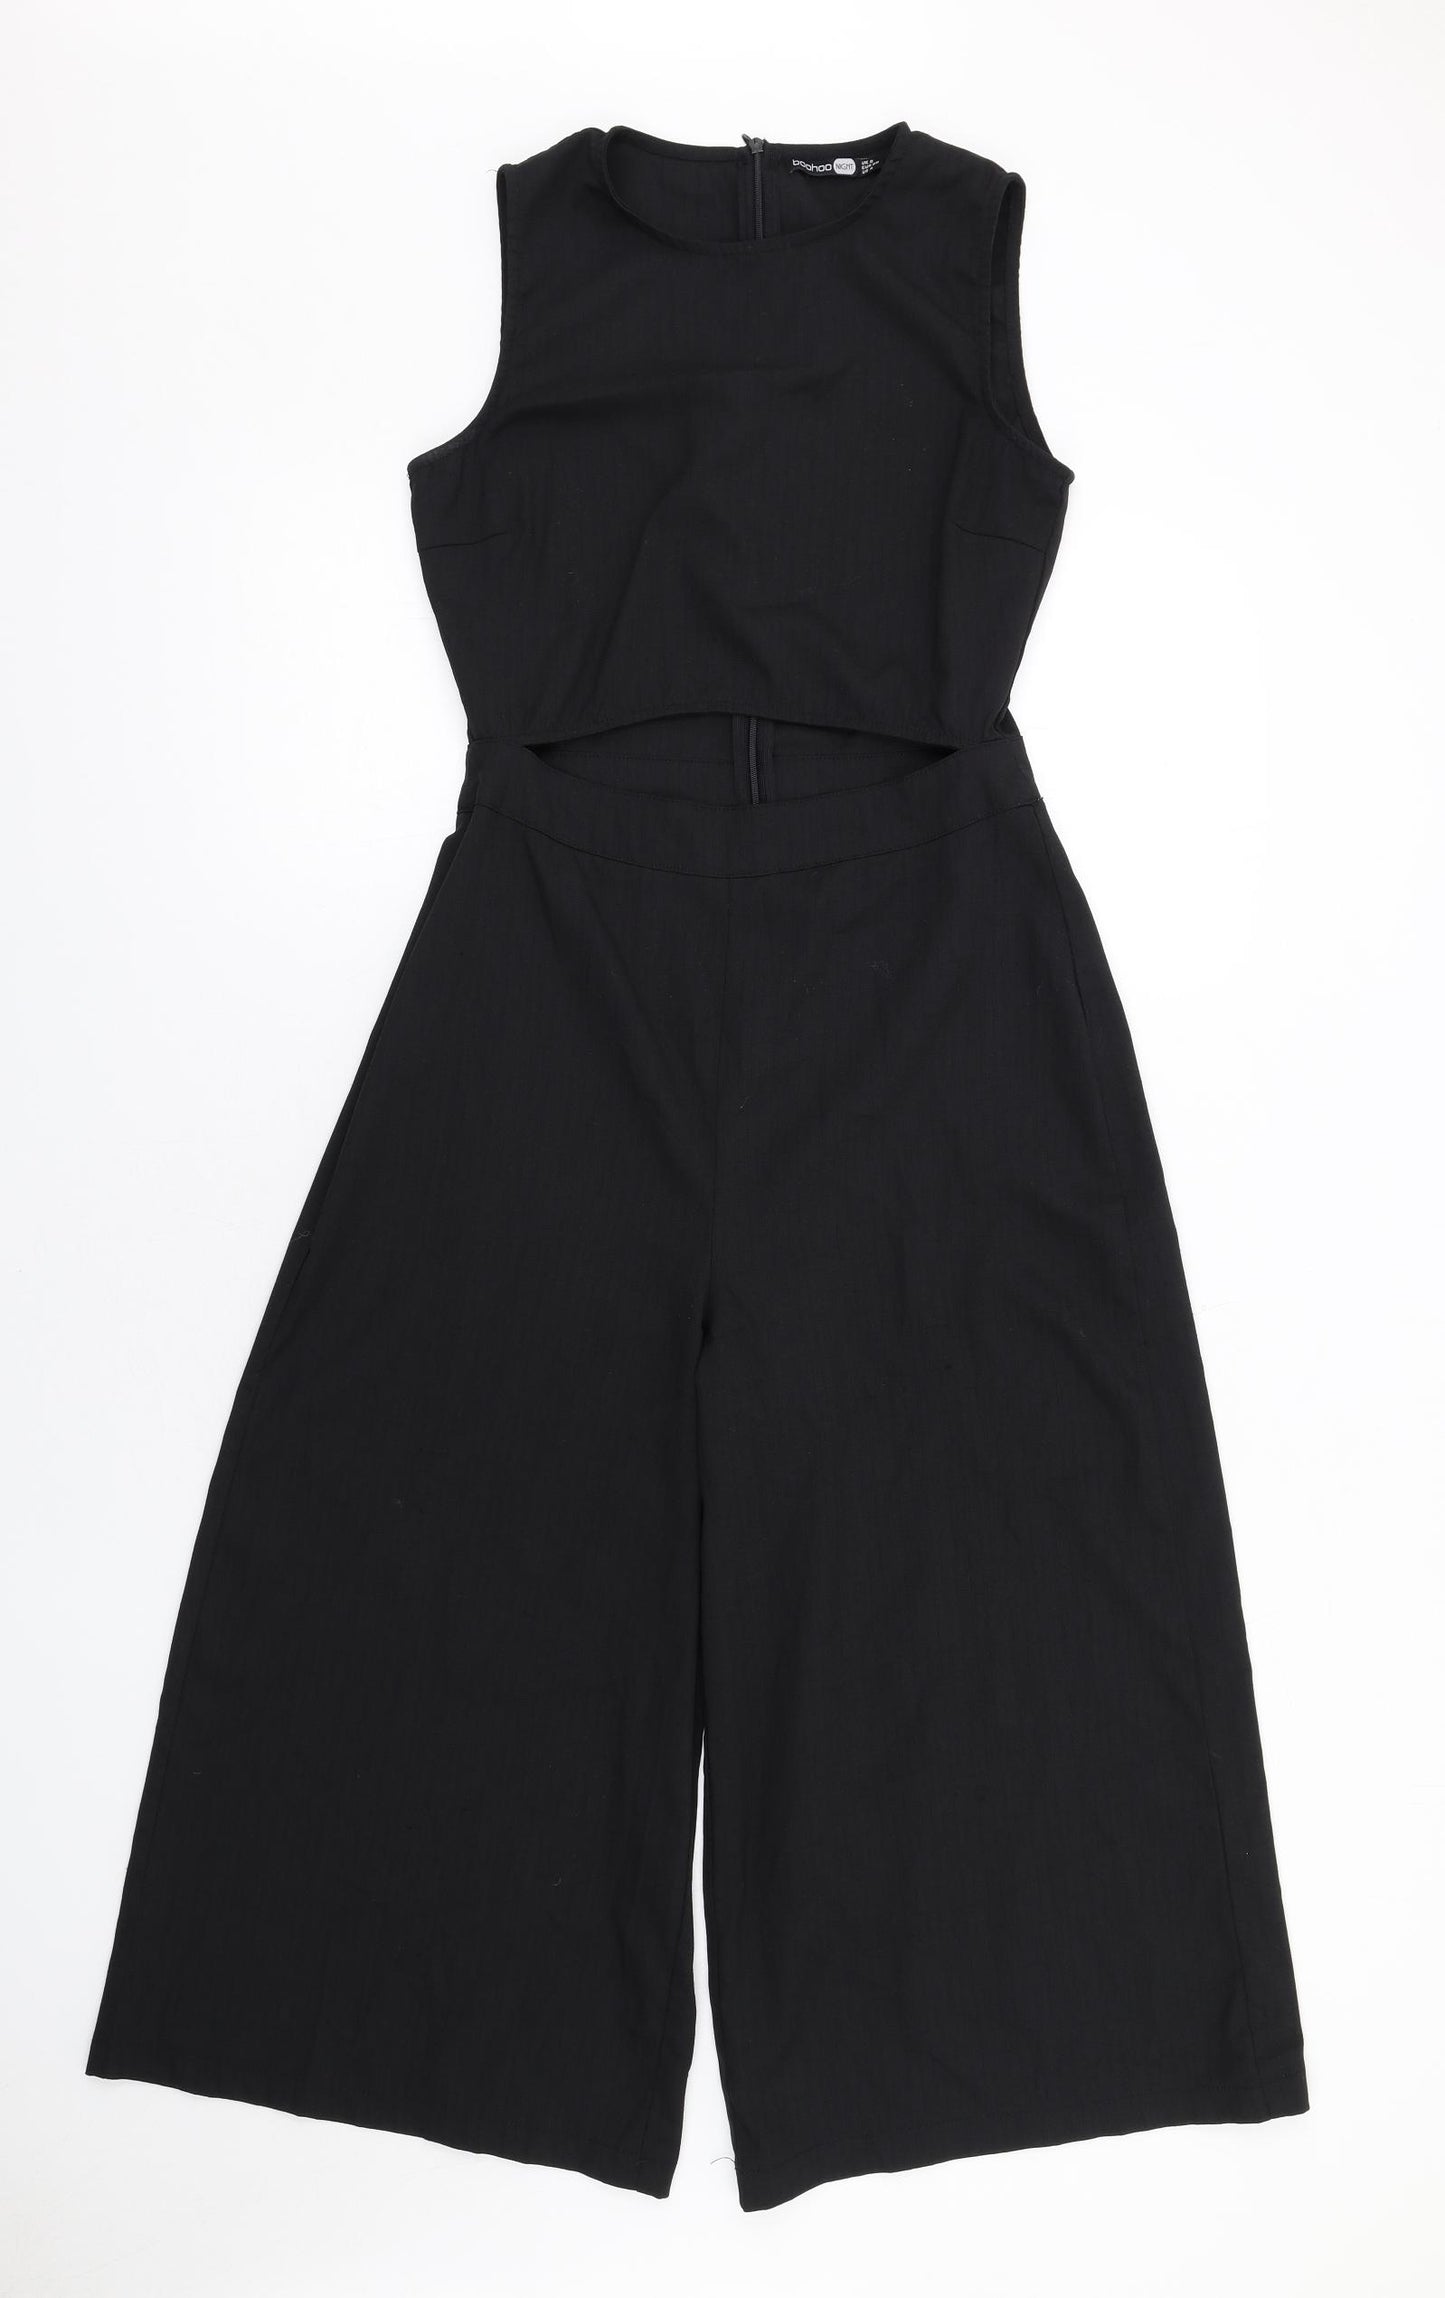 Boohoo Womens Black Polyester Jumpsuit One-Piece Size 8 L21 in Zip - Cut Out